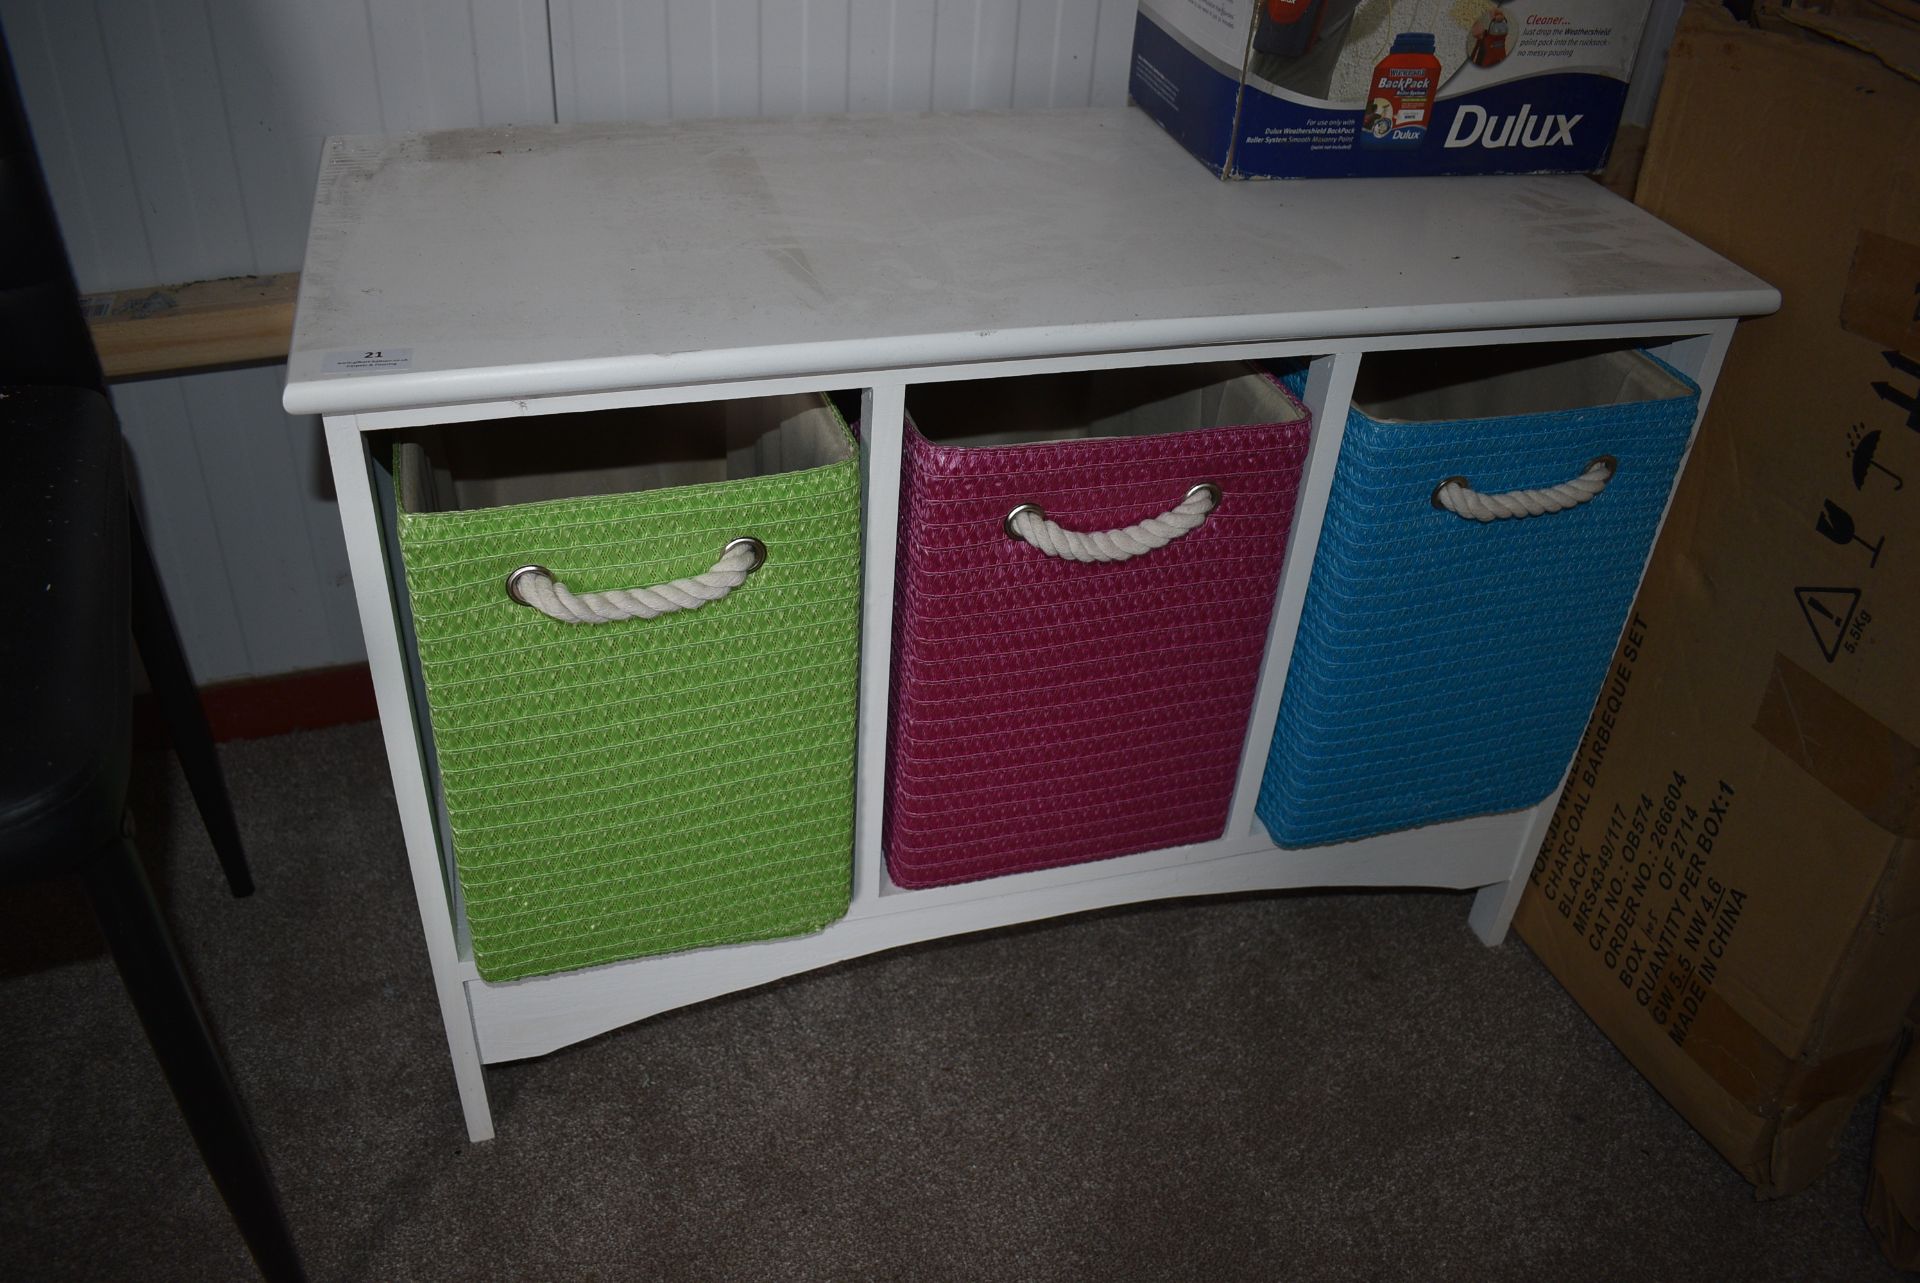 Storage Unit with Three Coloured Baskets 21.5” tall, 14” deep, 31.5” wide